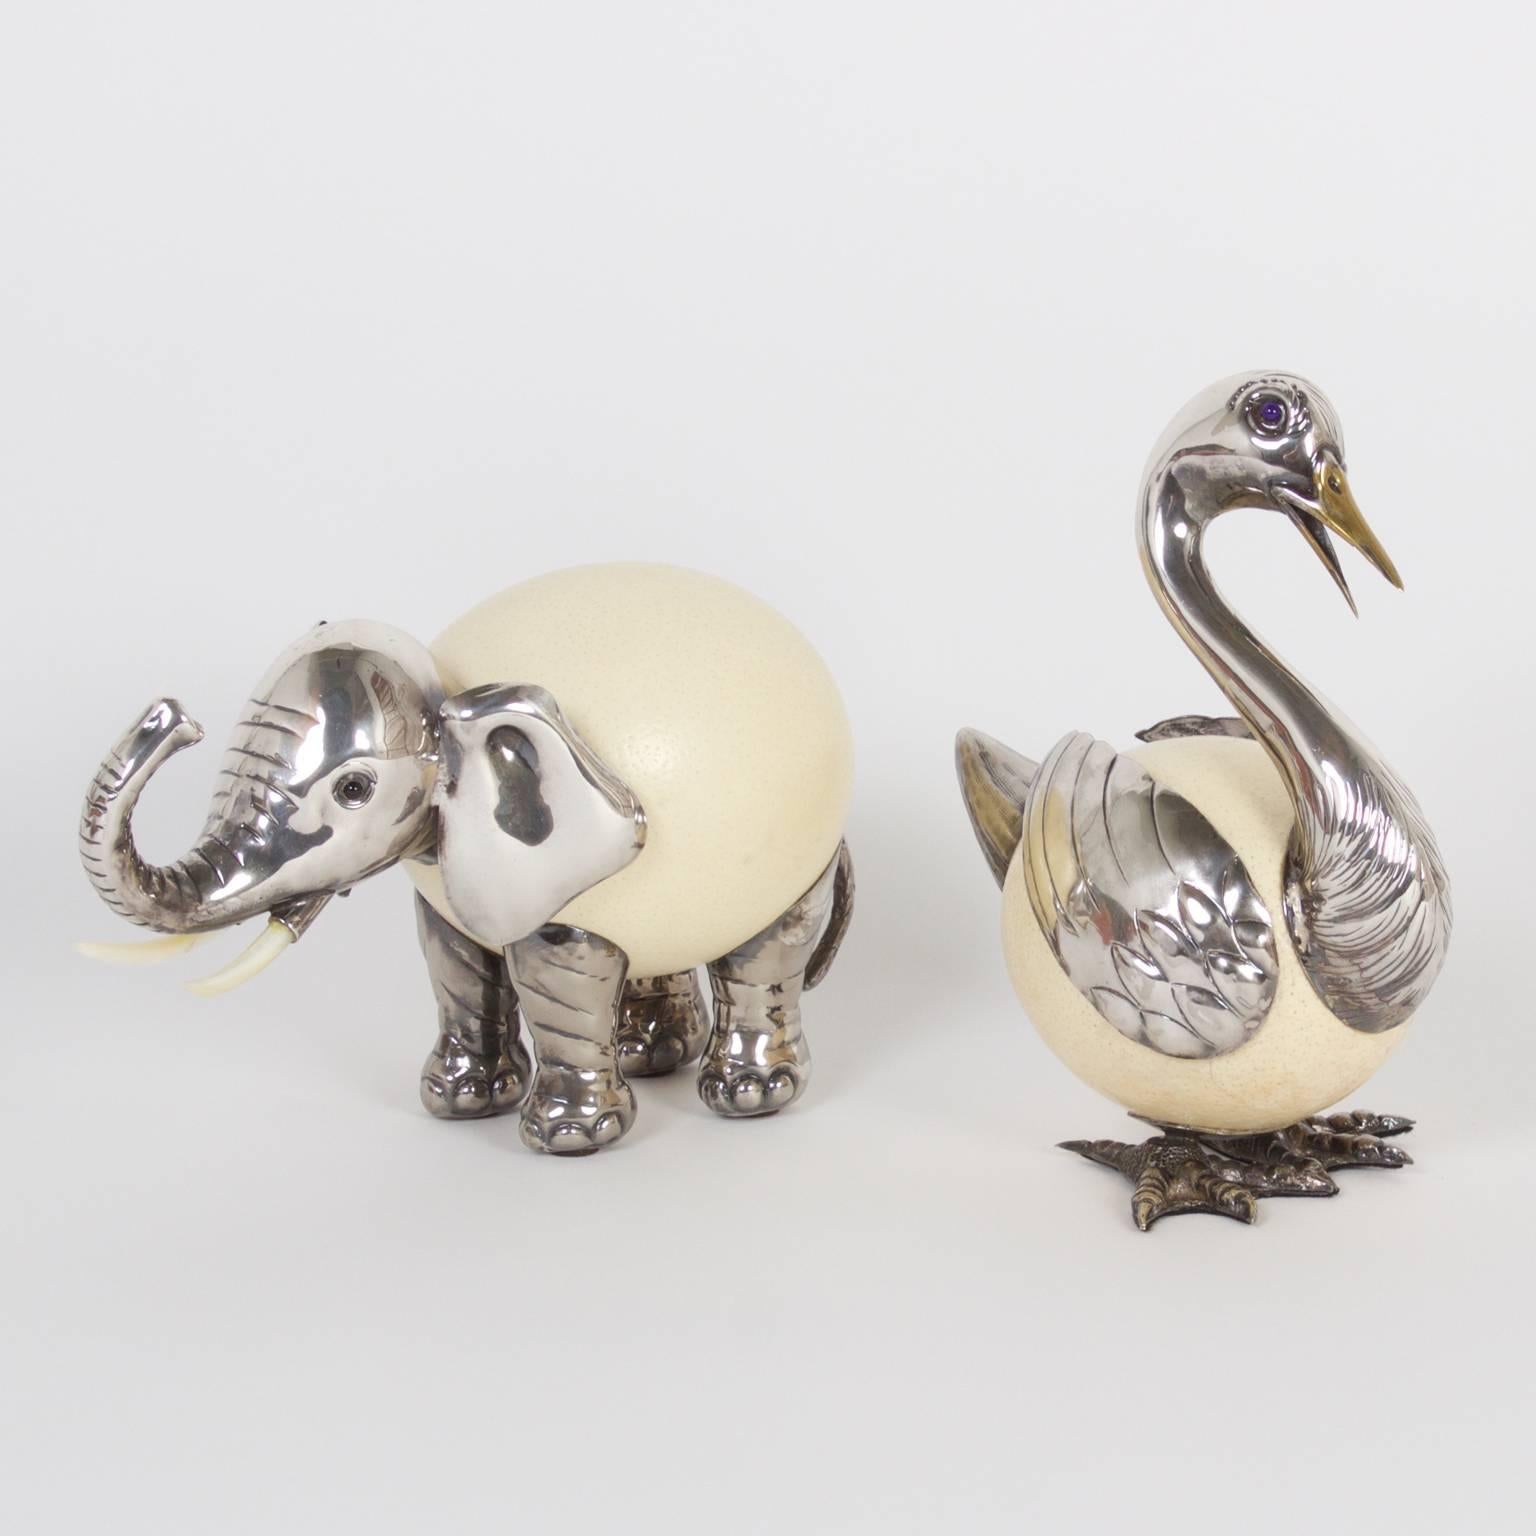 Amusing Binazzi animal sculptures, one an elephant and one a duck, both crafted with an ostrich egg and silvered metal. Both figures are signed with an impressed mark on the metal. Priced individually. 

From left to right:

Ref: 4058 H: 7 W: 12 D: